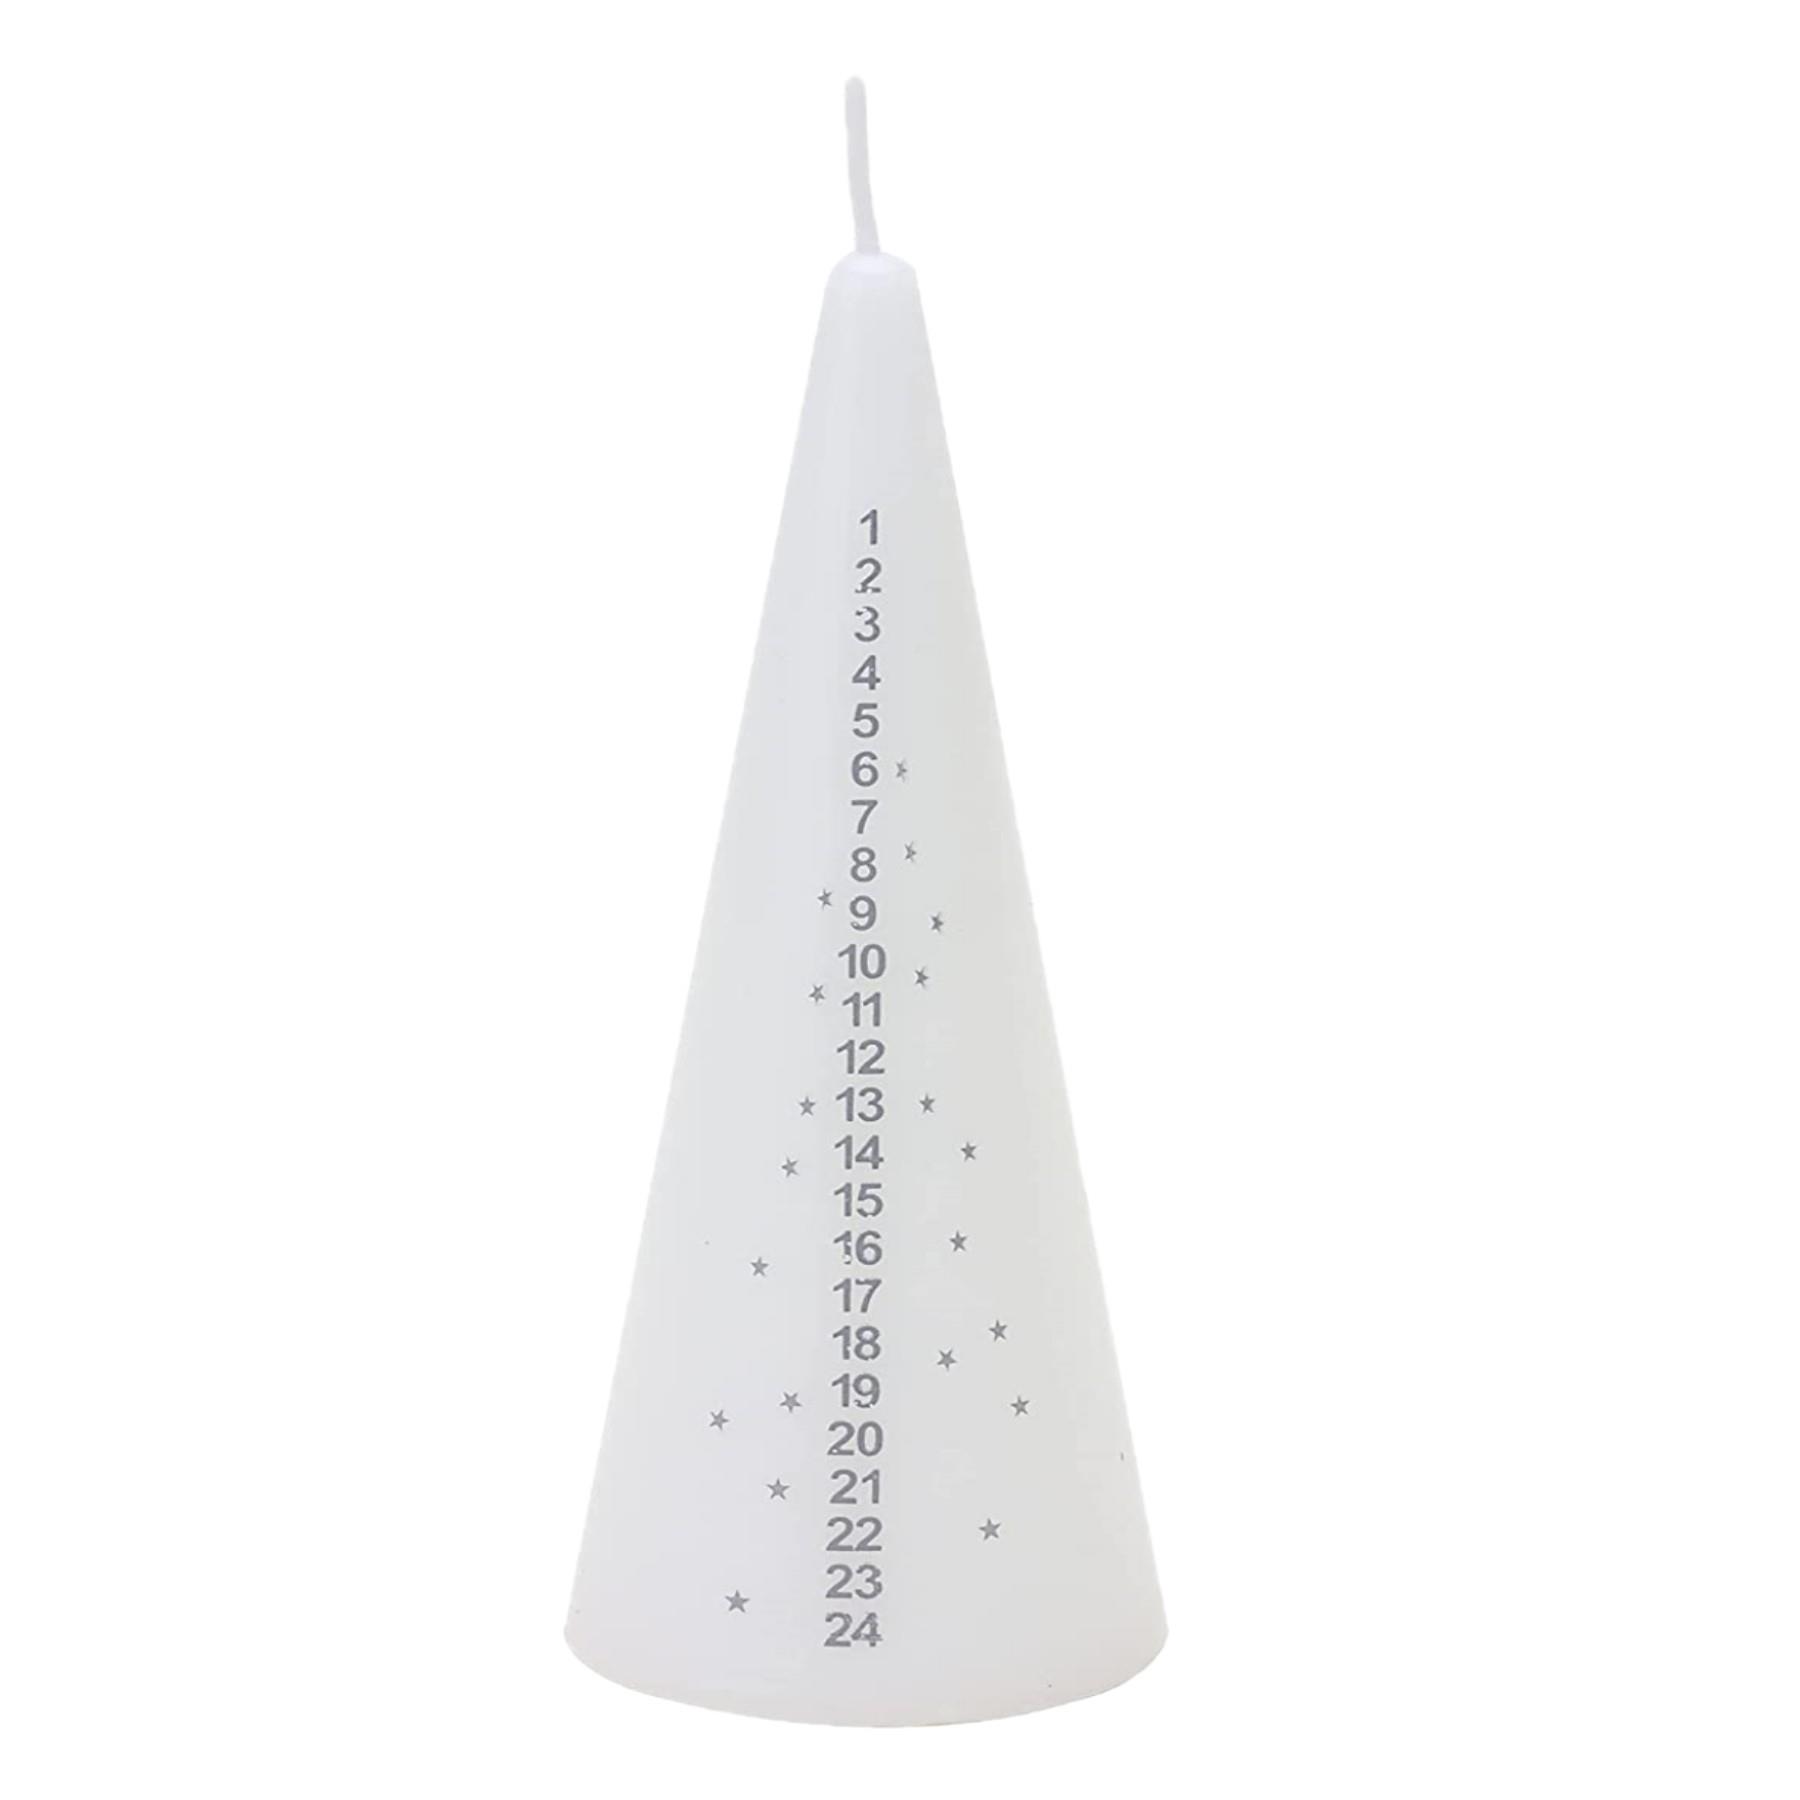 15cm Cone Christmas Advent Countdown Candle - White